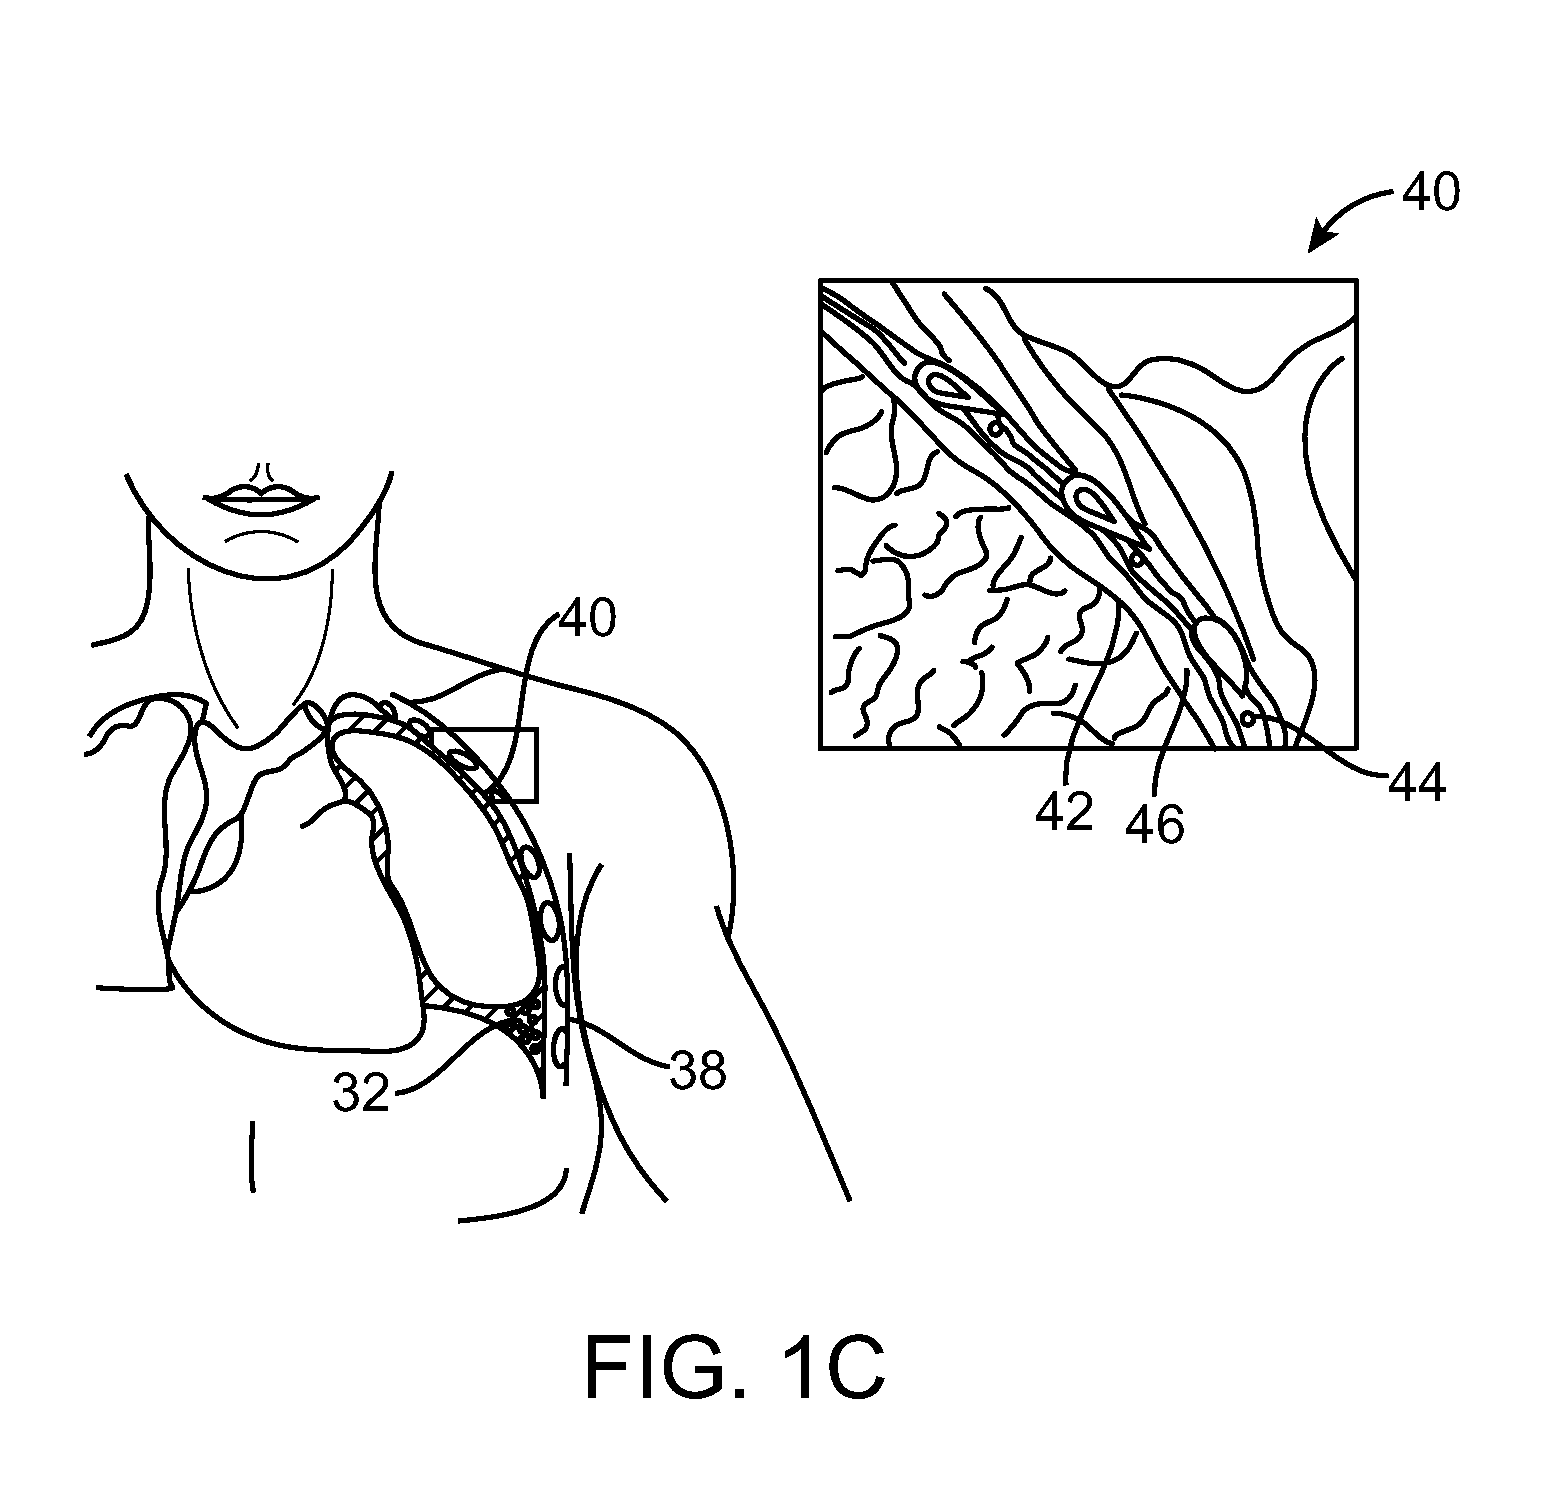 Lung Volume Reduction Devices, Methods, and Systems